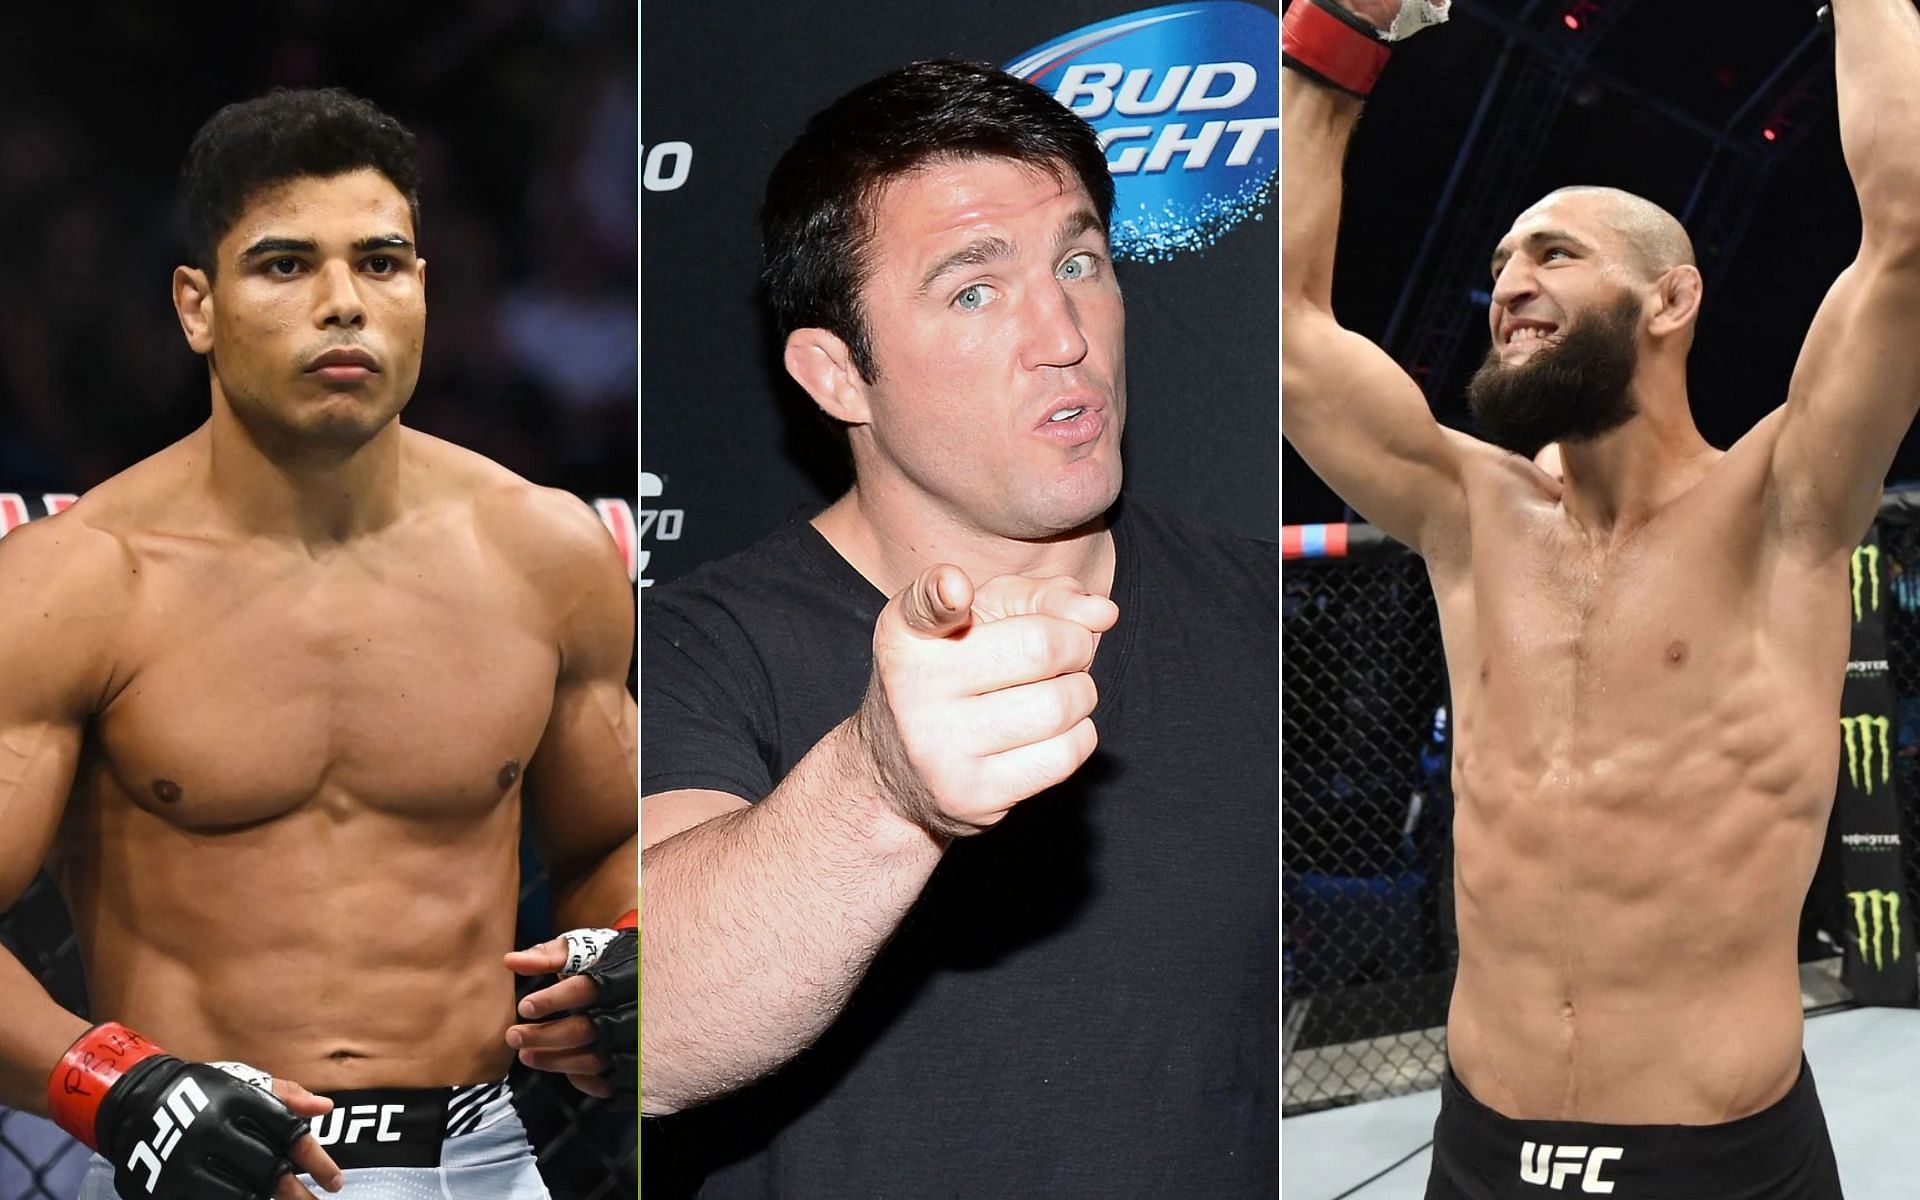 Paulo Costa [Left], Chael Sonnen [Middle], and Khamzat Chimaev [Right]